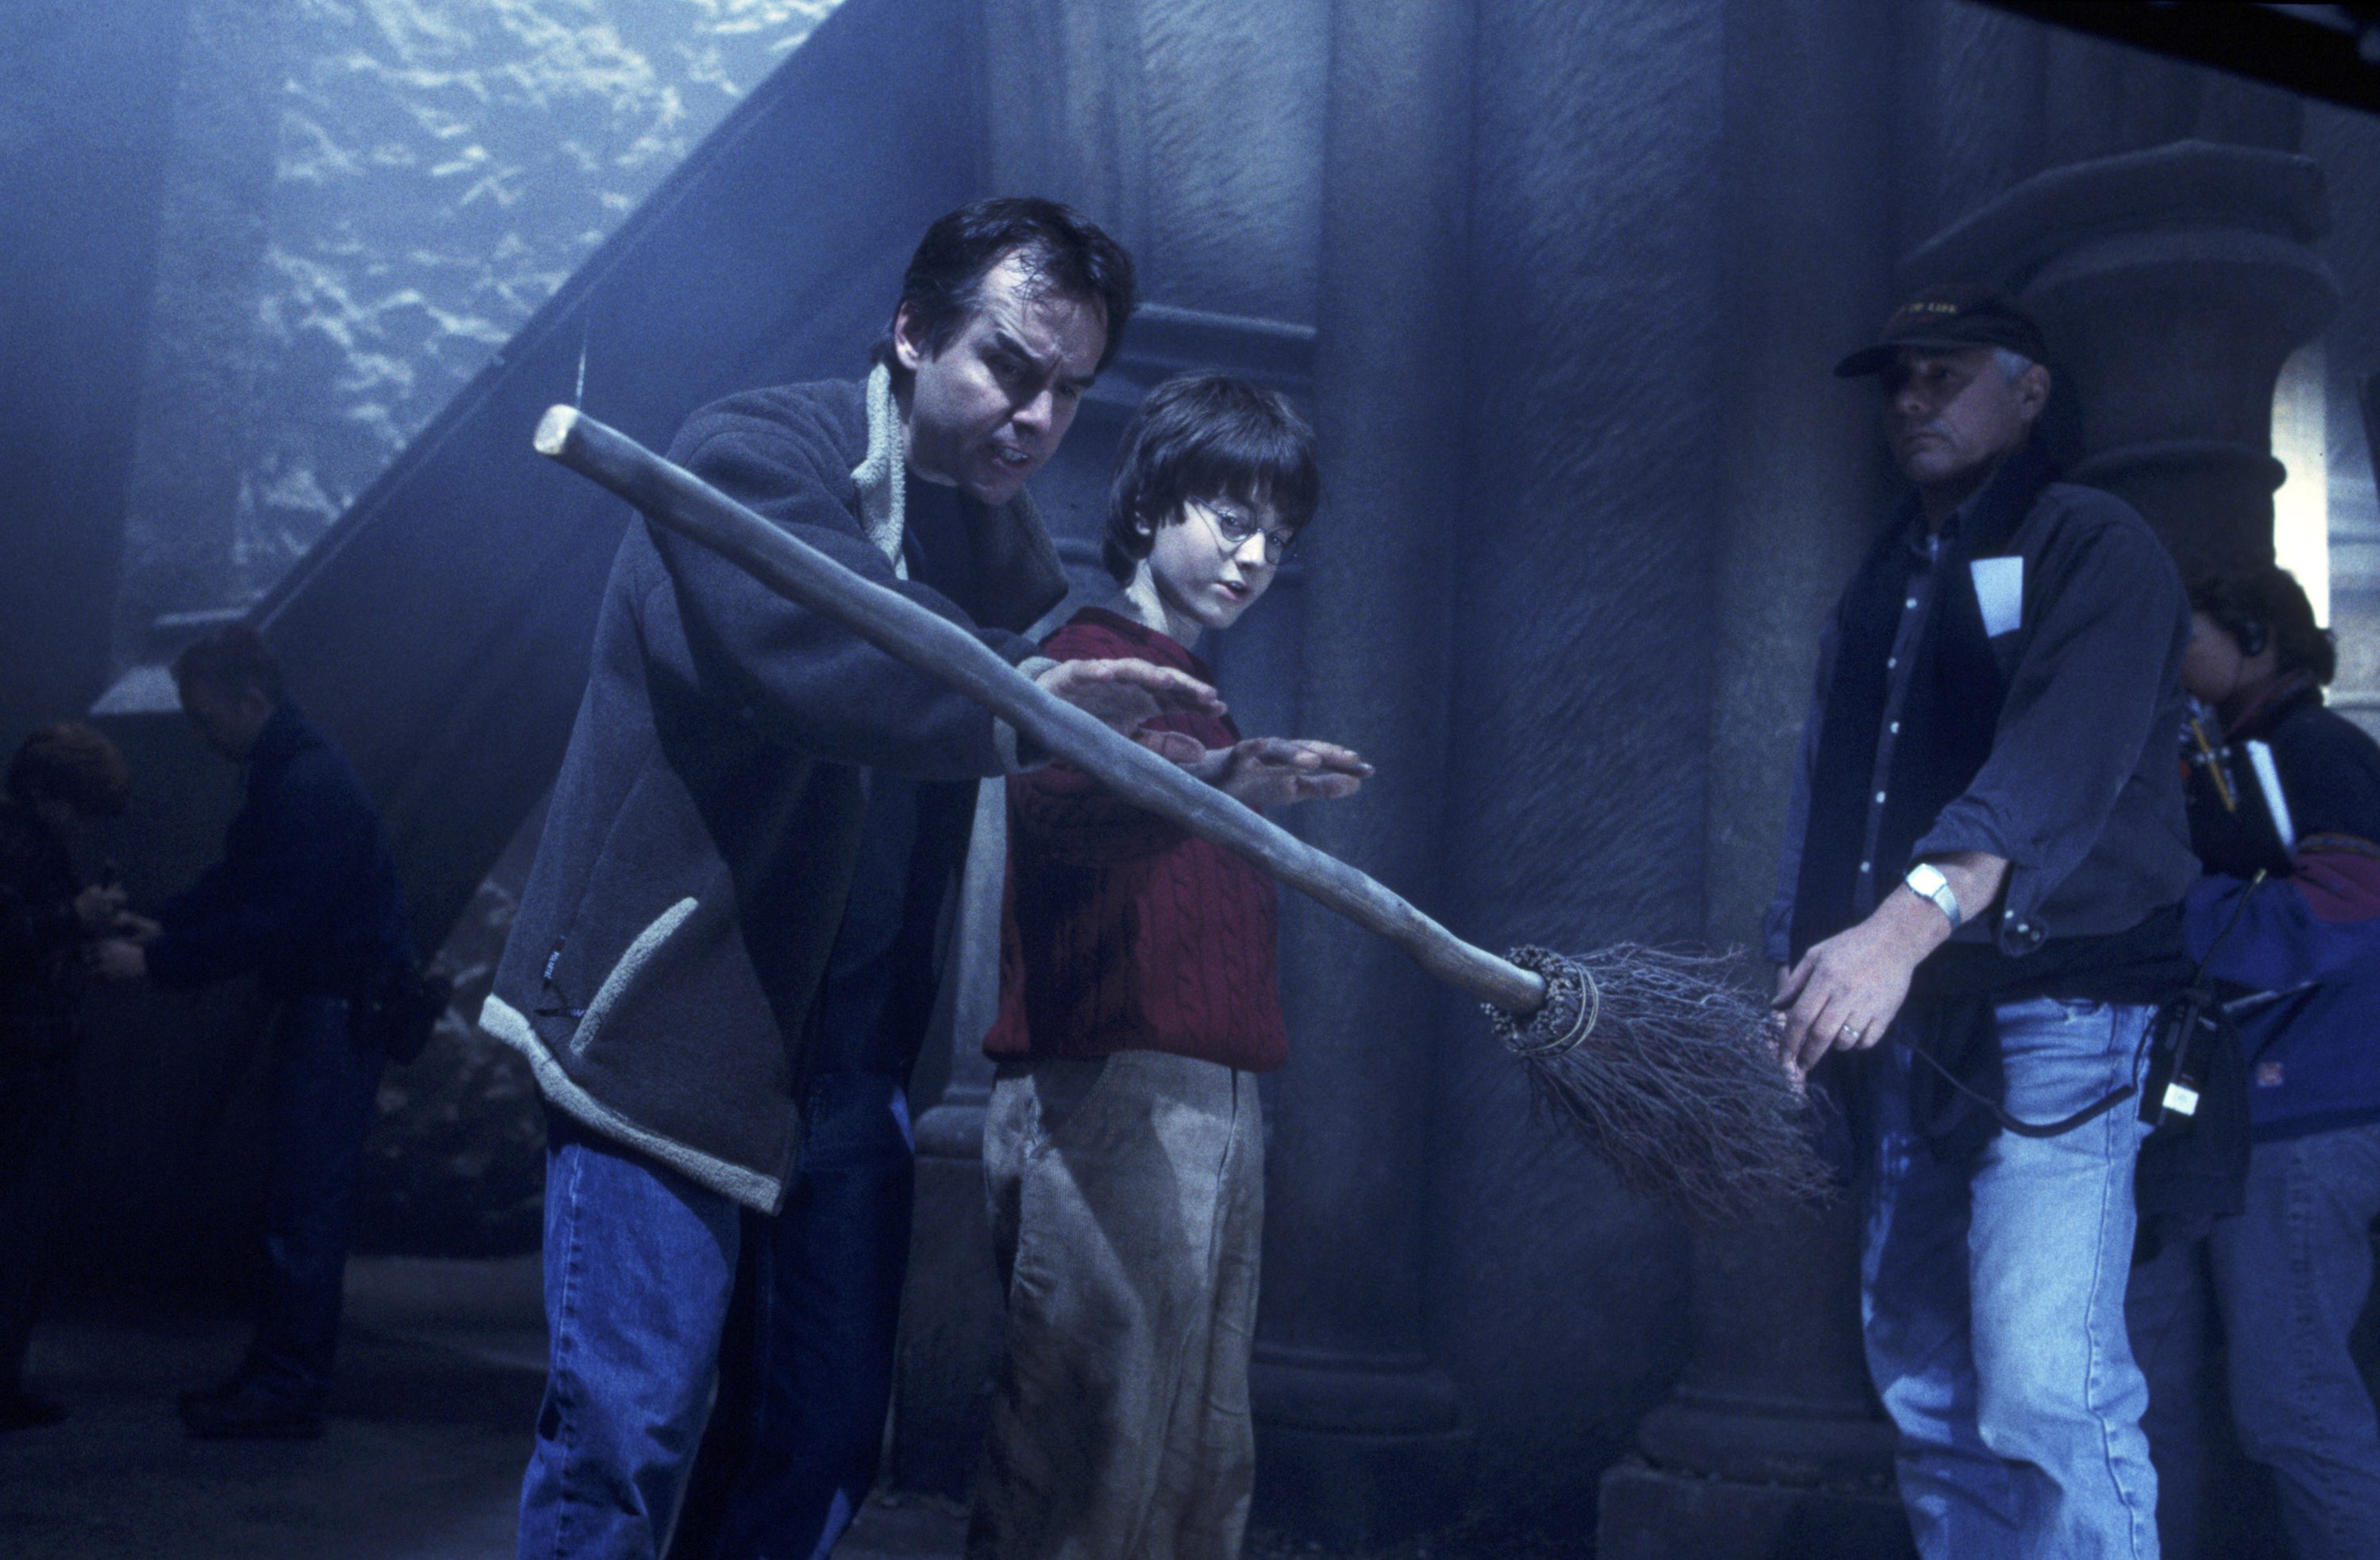 From the archive: Harry Potter and the Philosopher's Stone